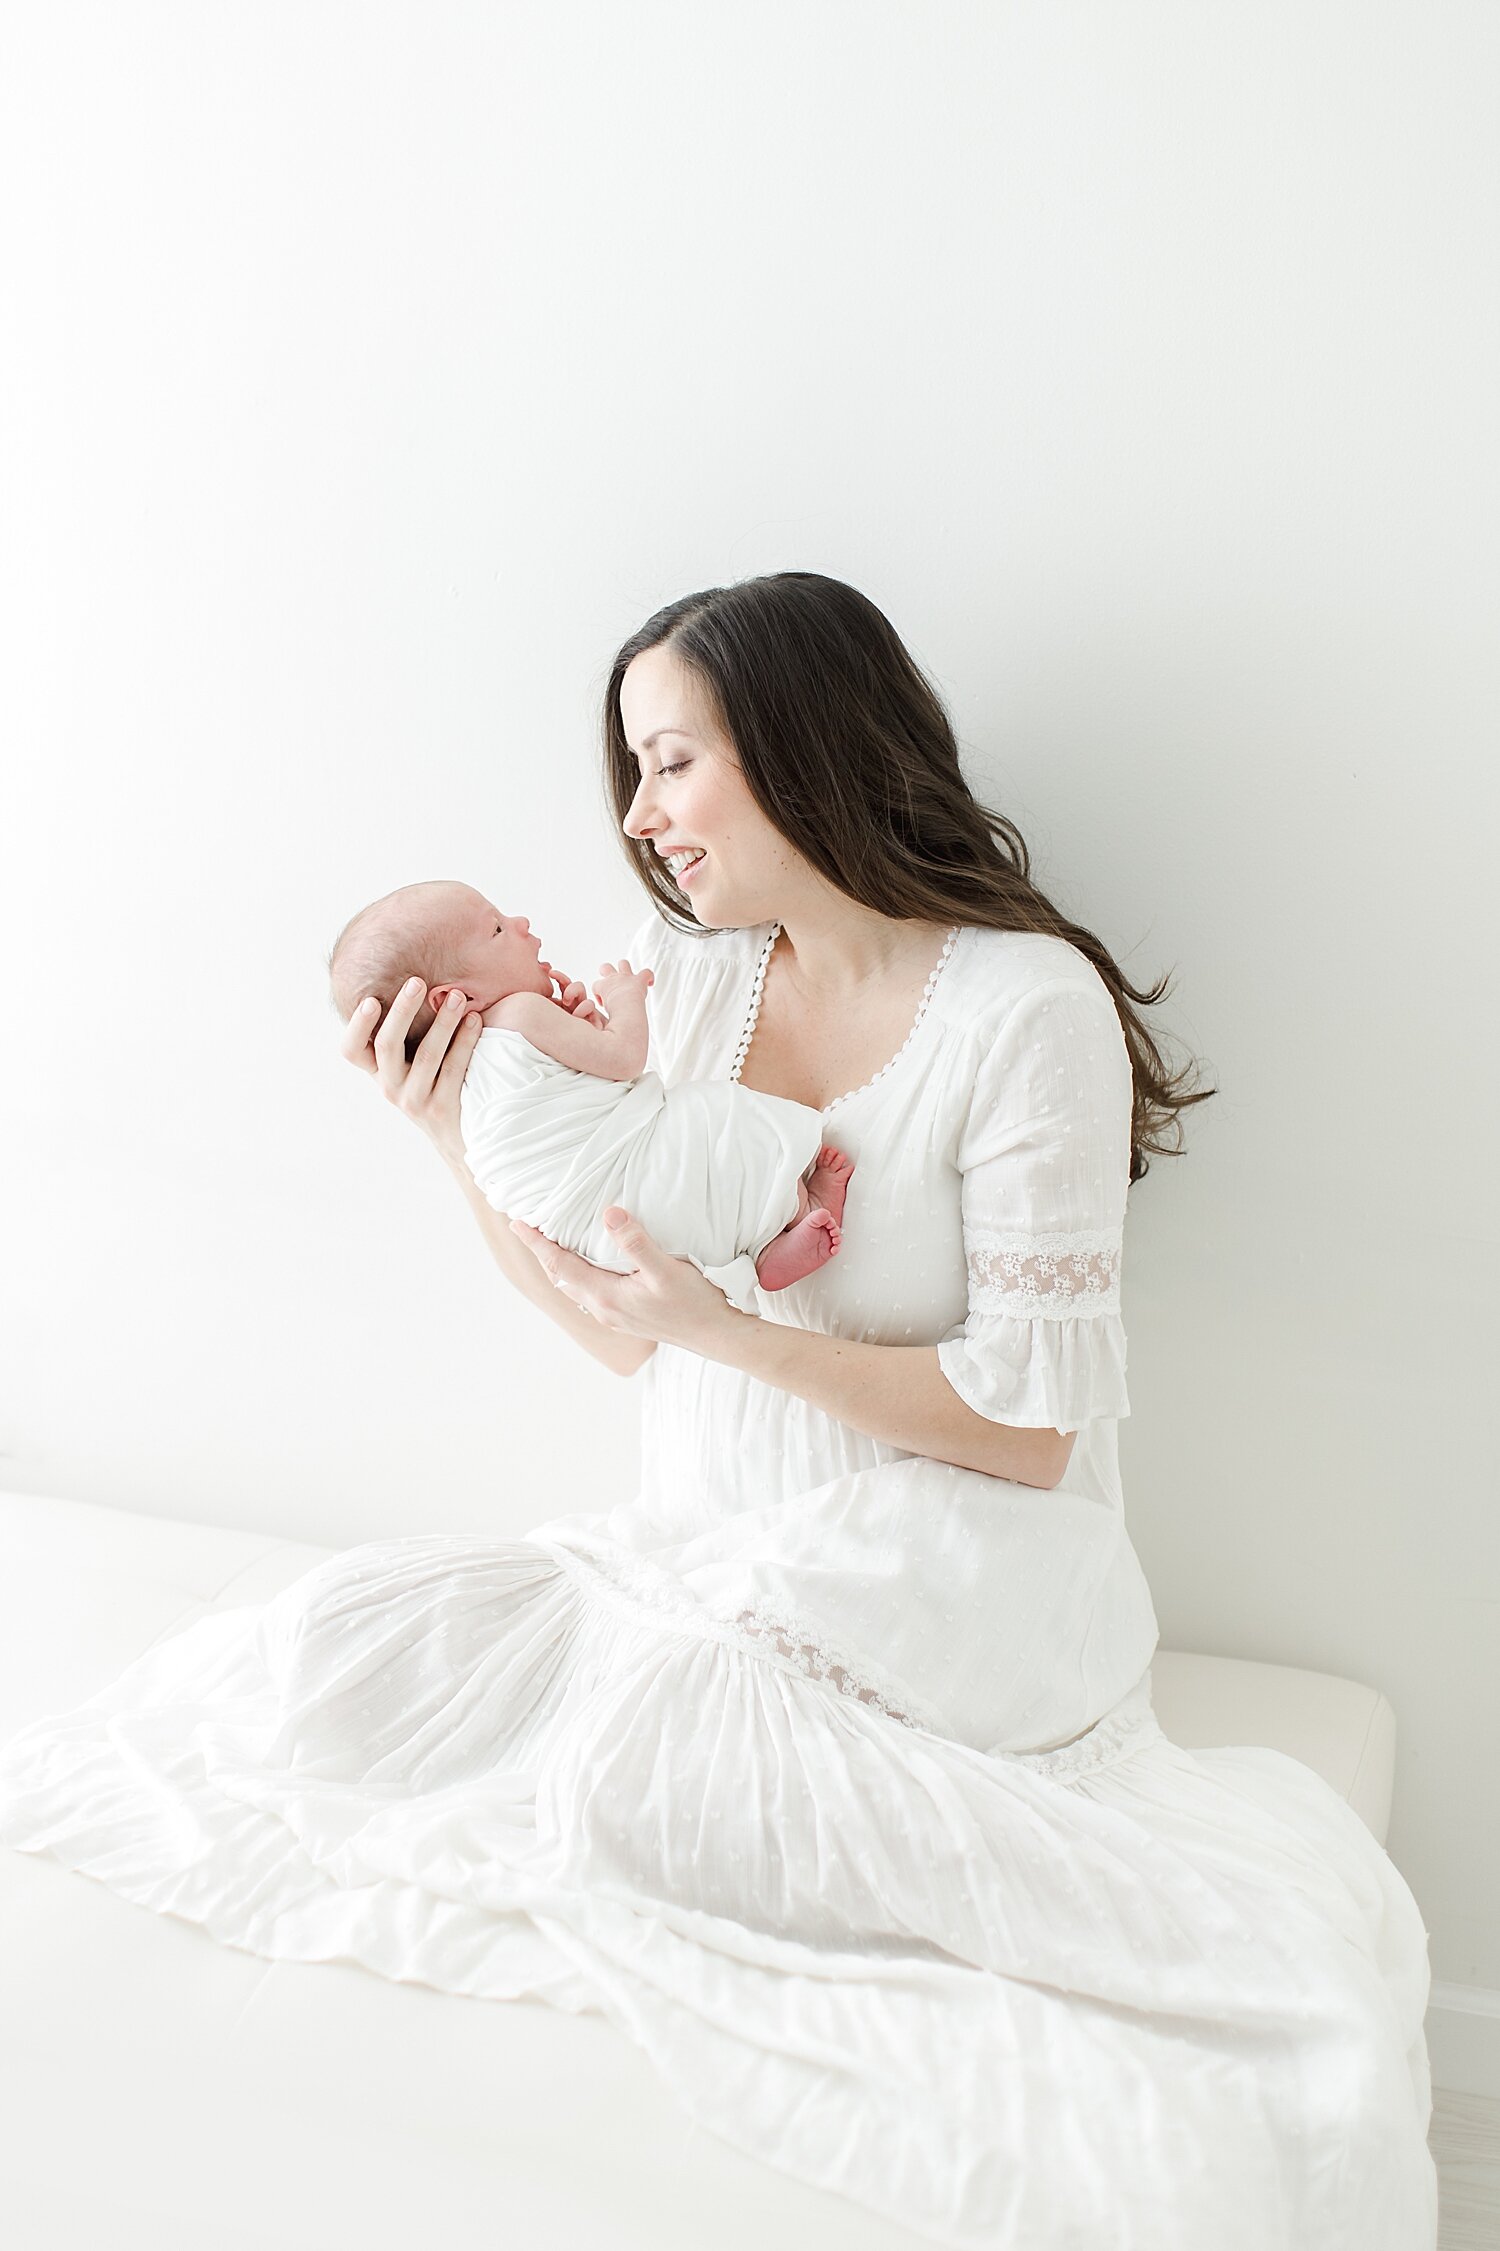 Newborn photo of mom and baby boy in studio. Photo by Kristin Wood Photography.